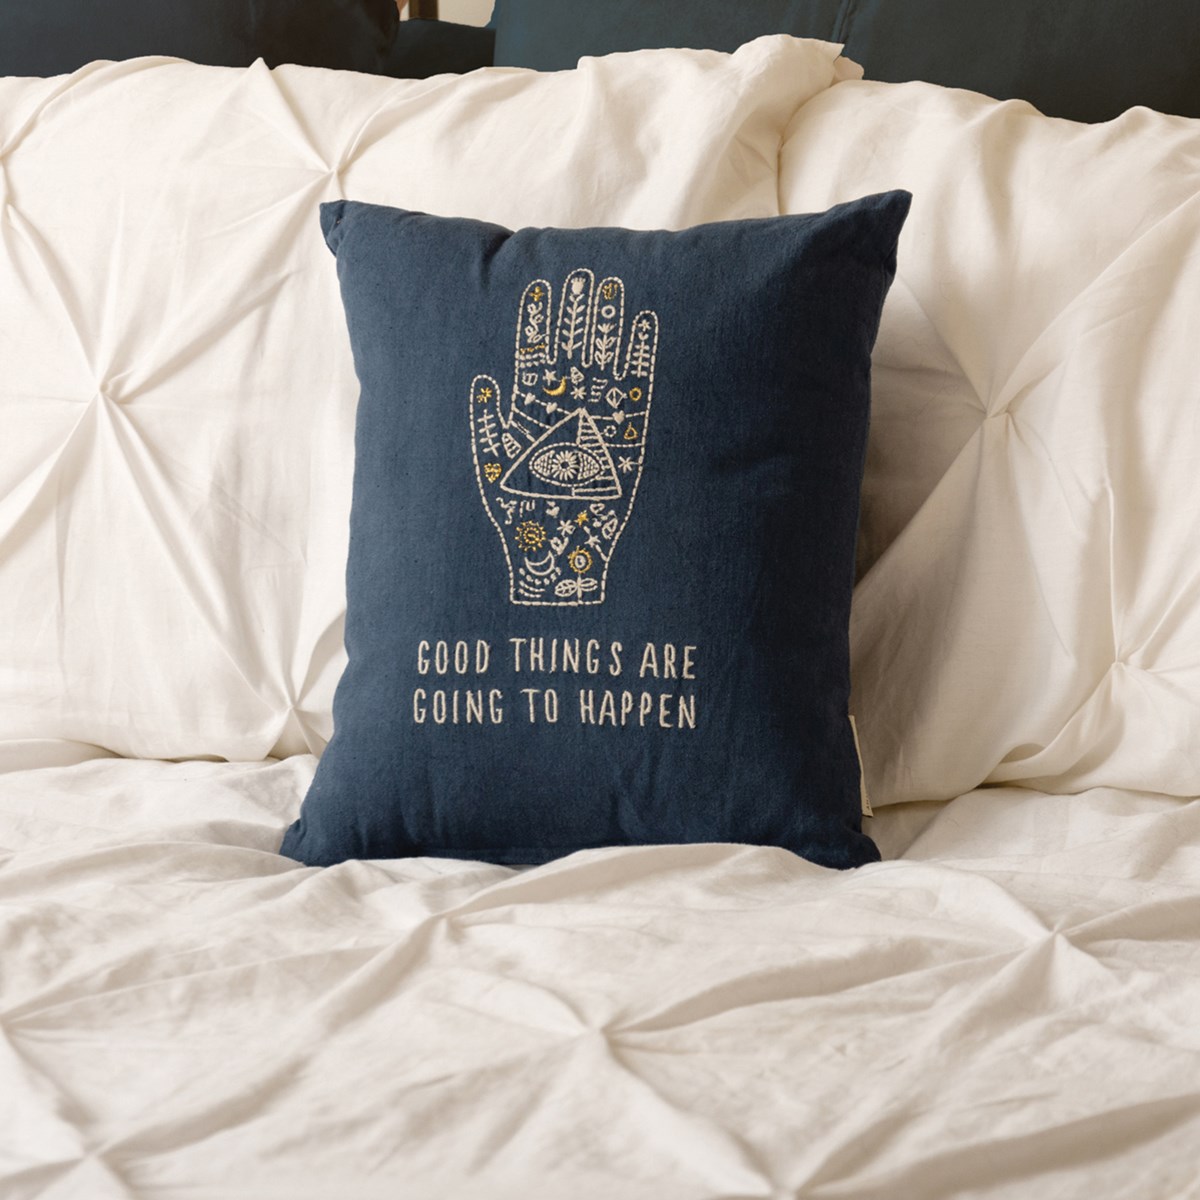 Good Things Are Going To Happen Pillow - Cotton, Linen, Zipper